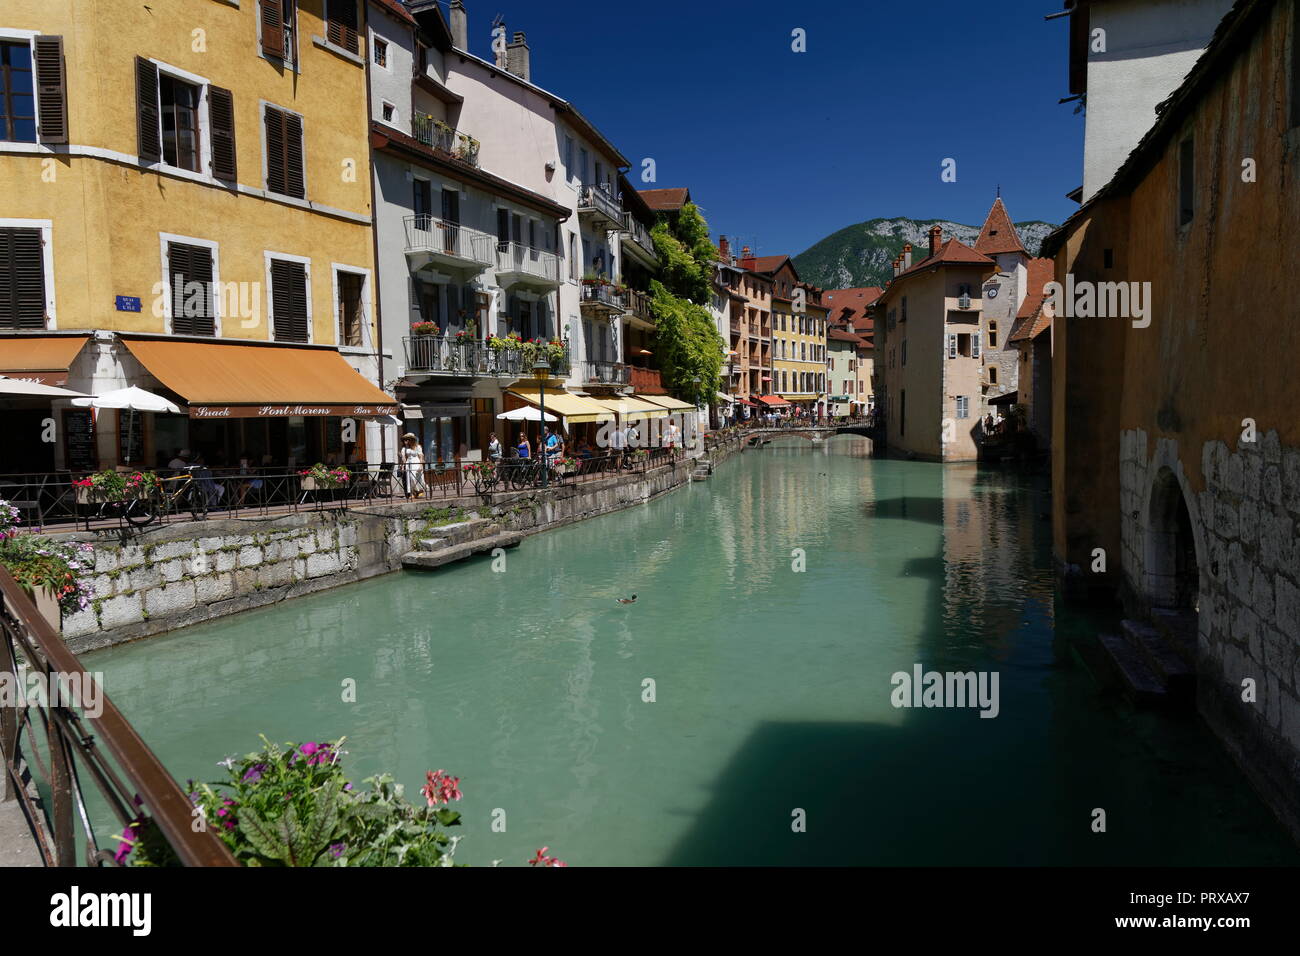 Shops and cafes on the canals of Annecy France Stock Photo